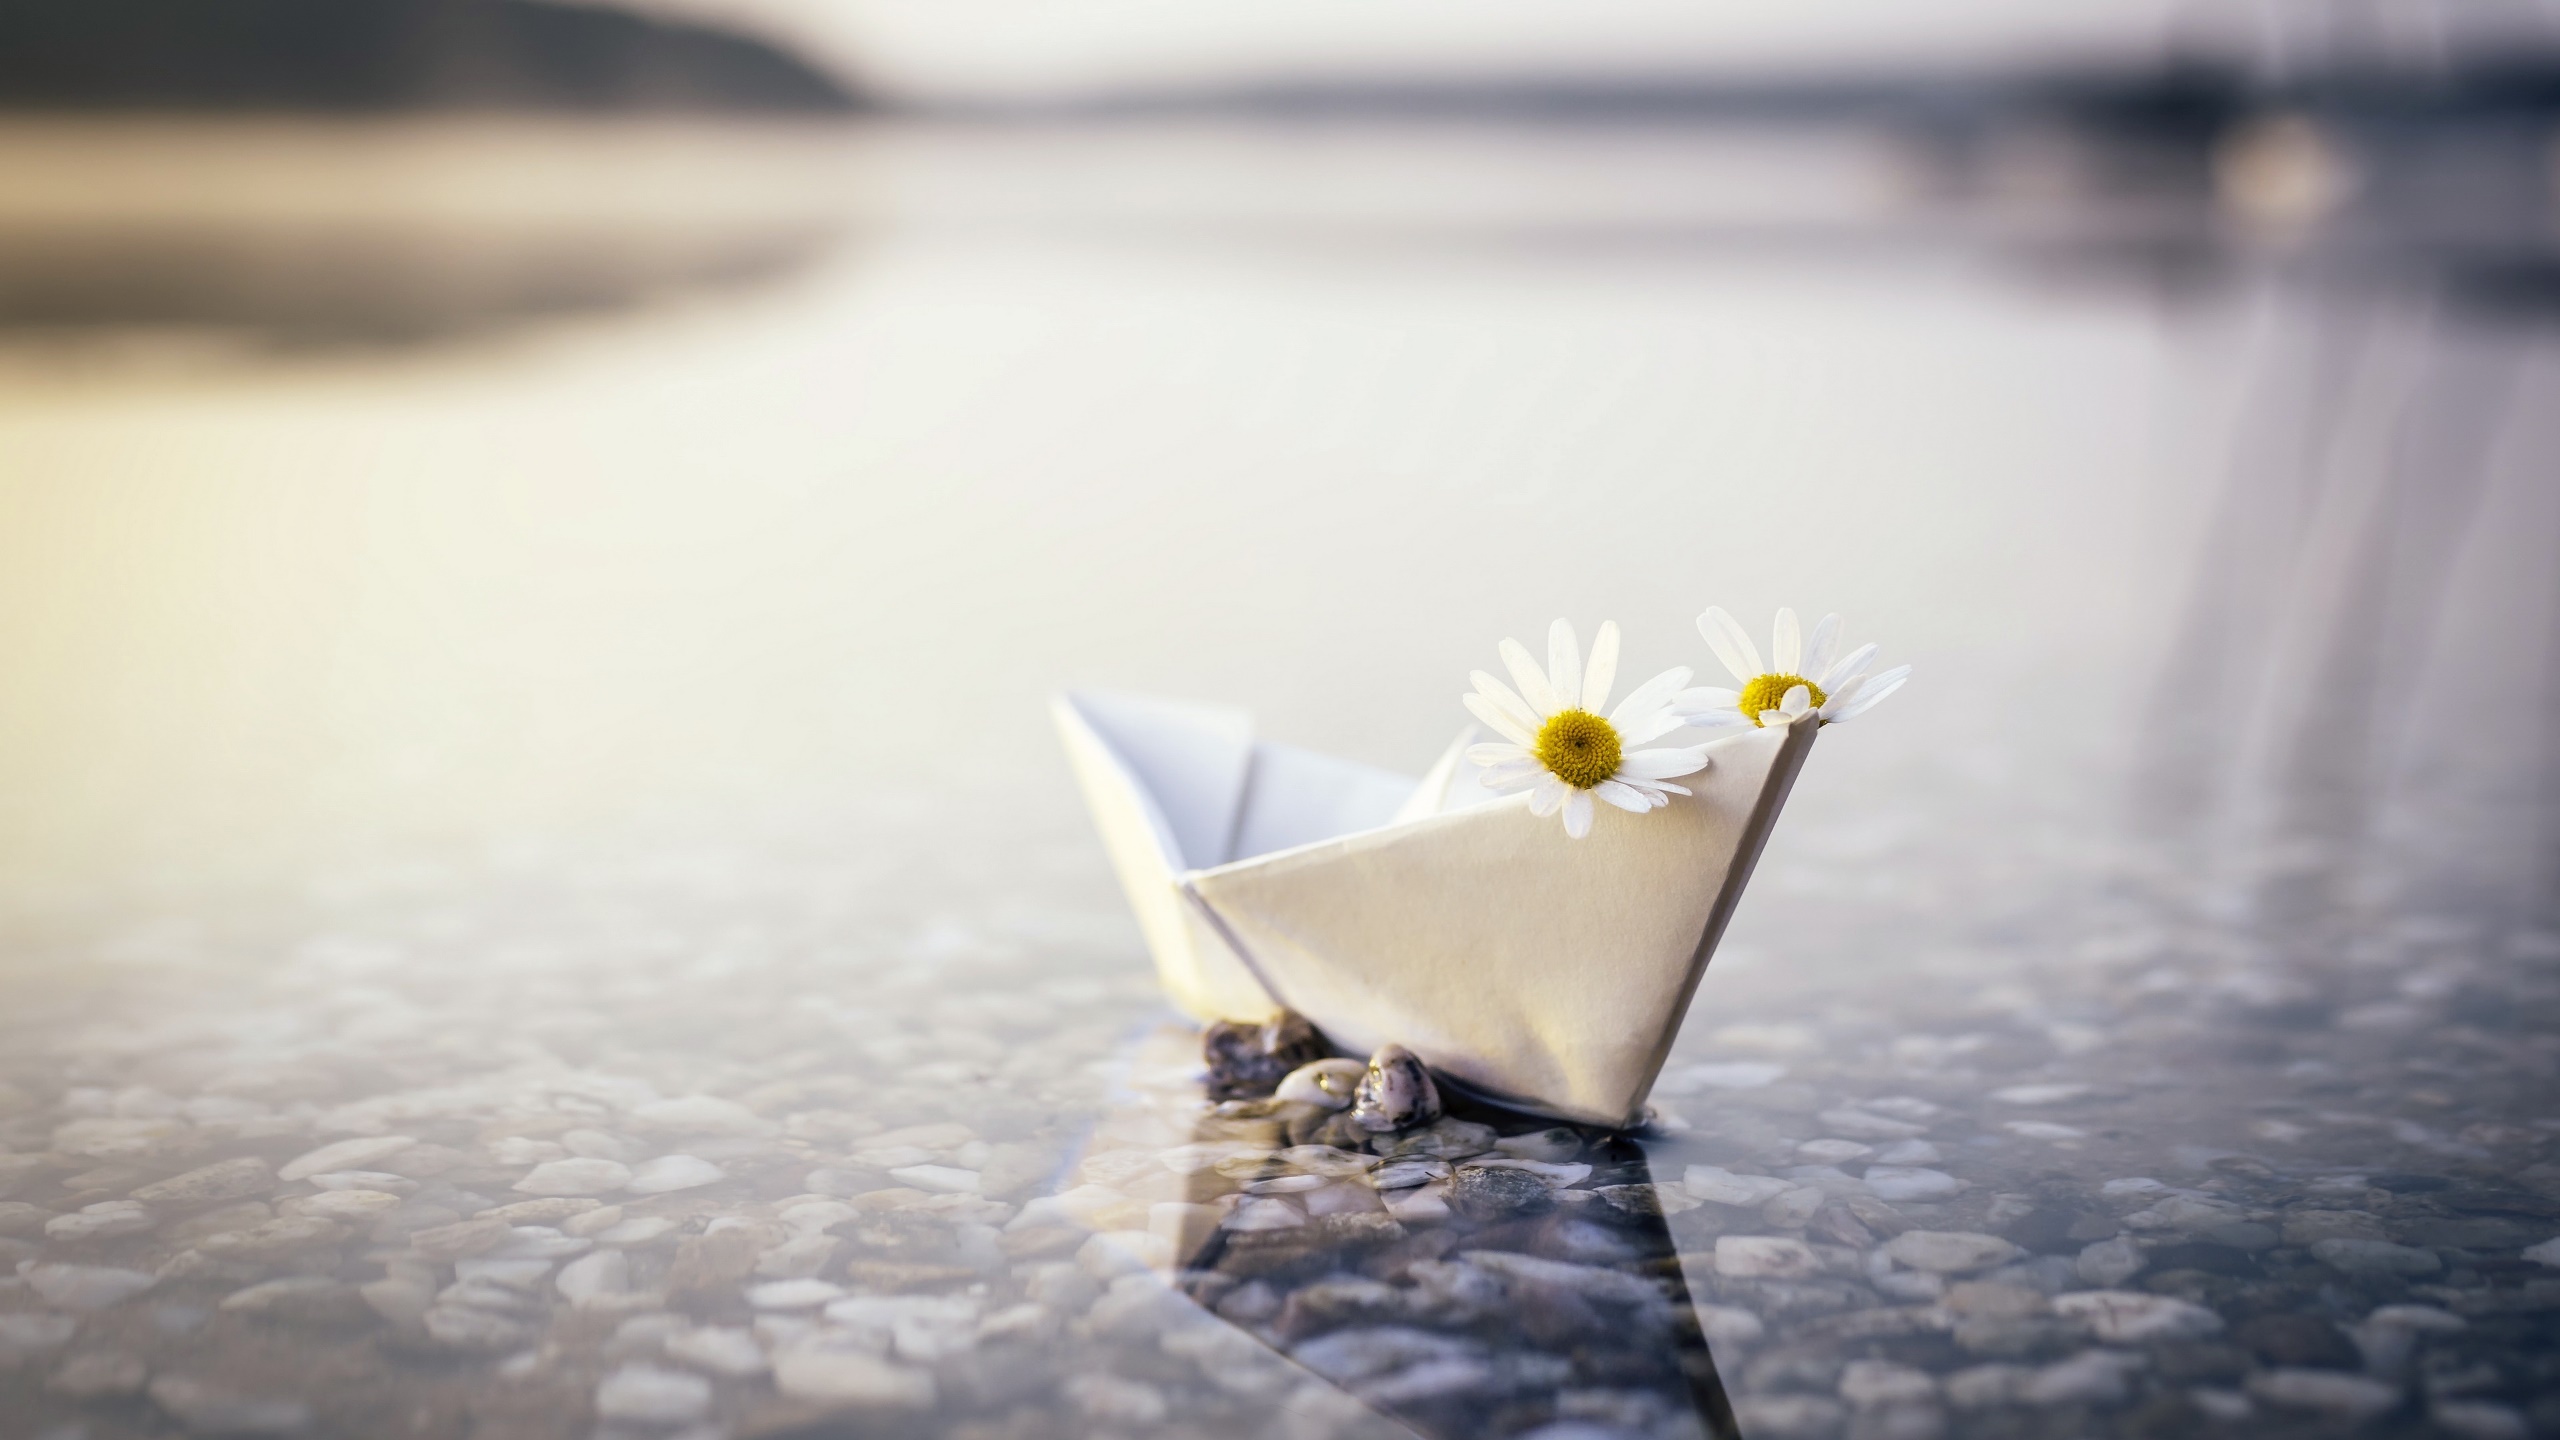 General 2560x1440 outdoors paper paper boats flowers plants blurry background closeup